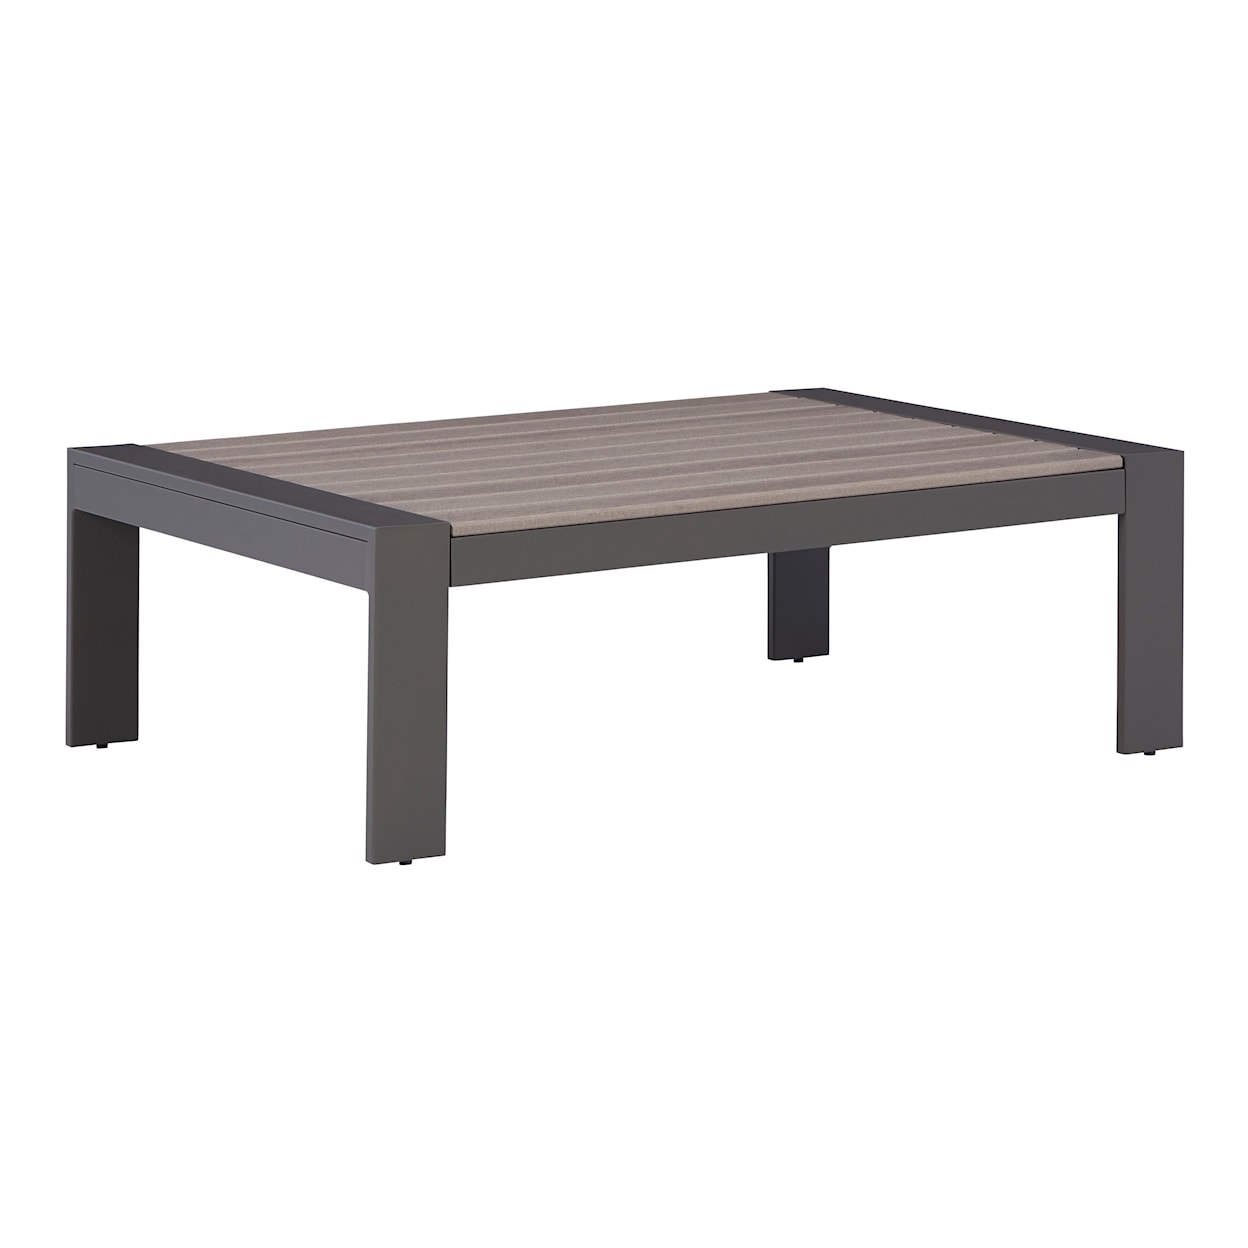 Signature Design by Ashley Tropicava Outdoor Coffee Table